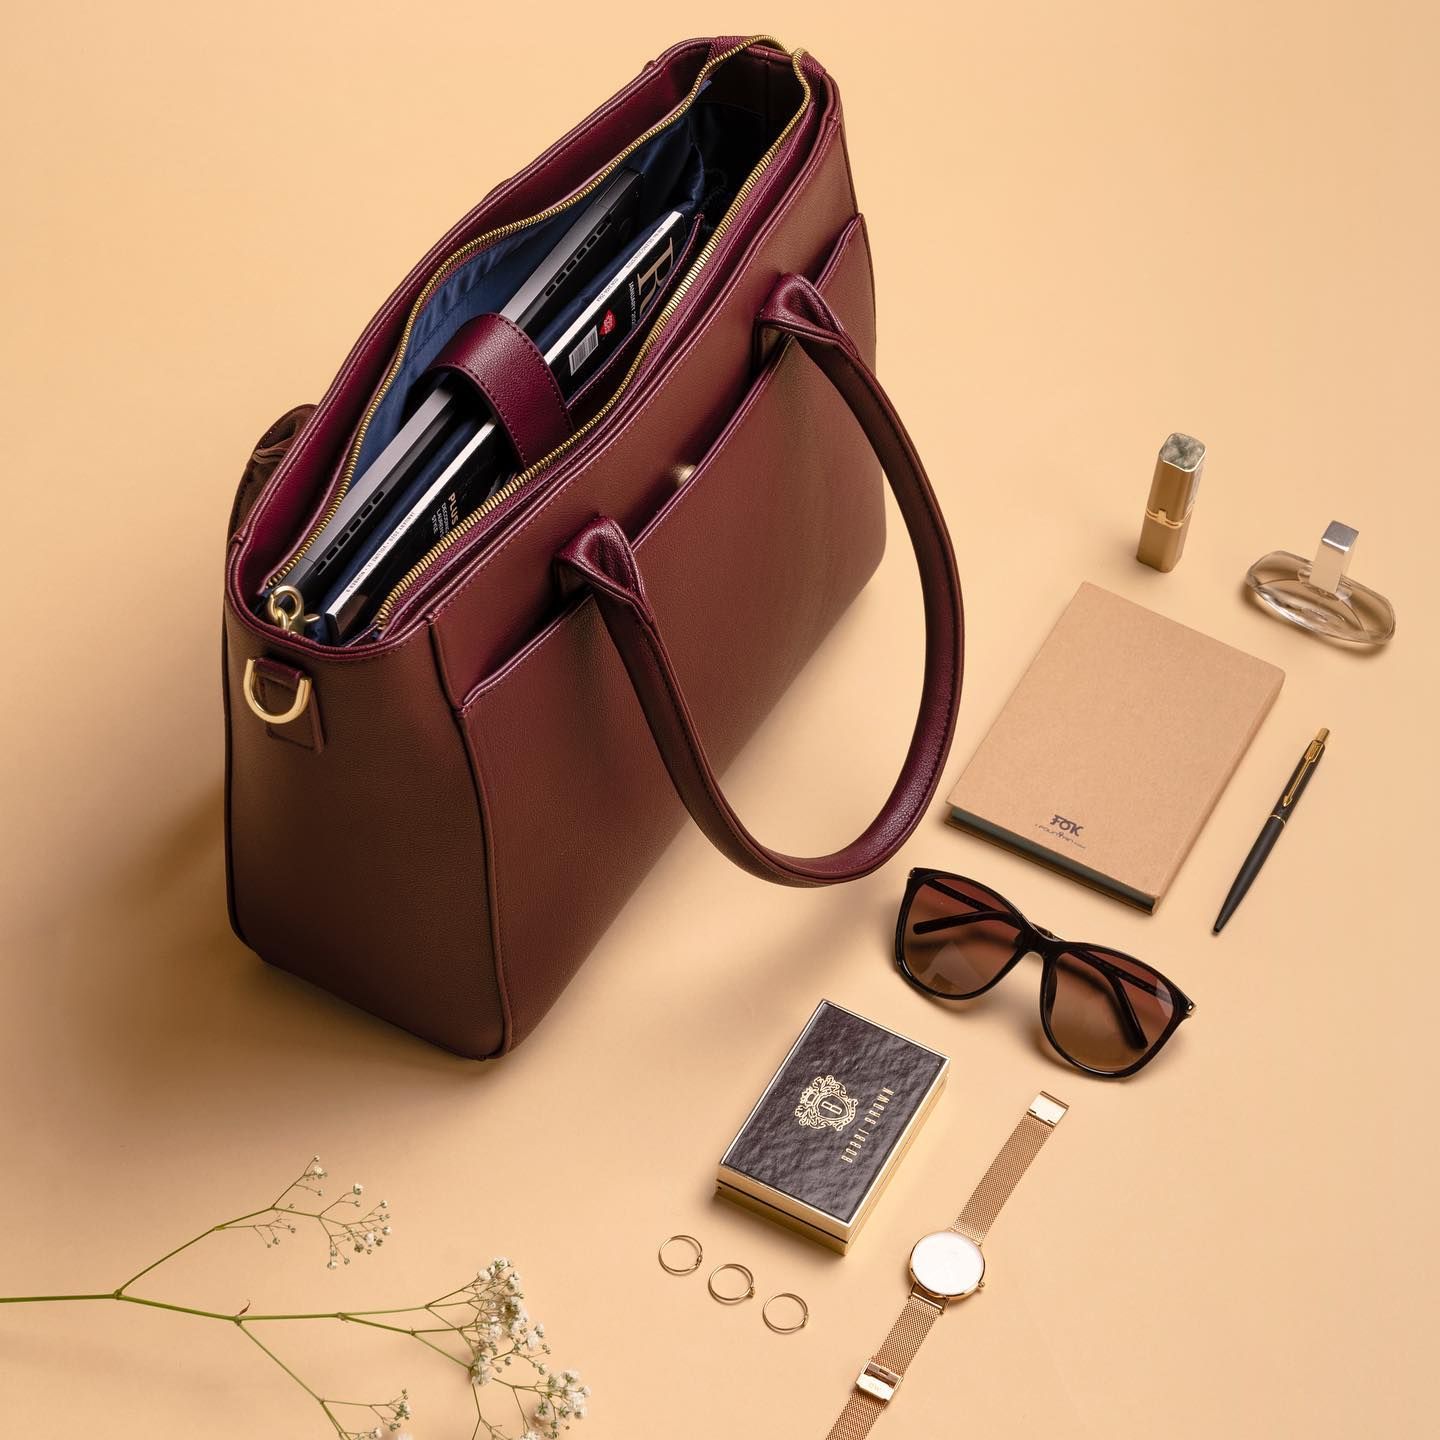 Give style to you with leather laptop bag